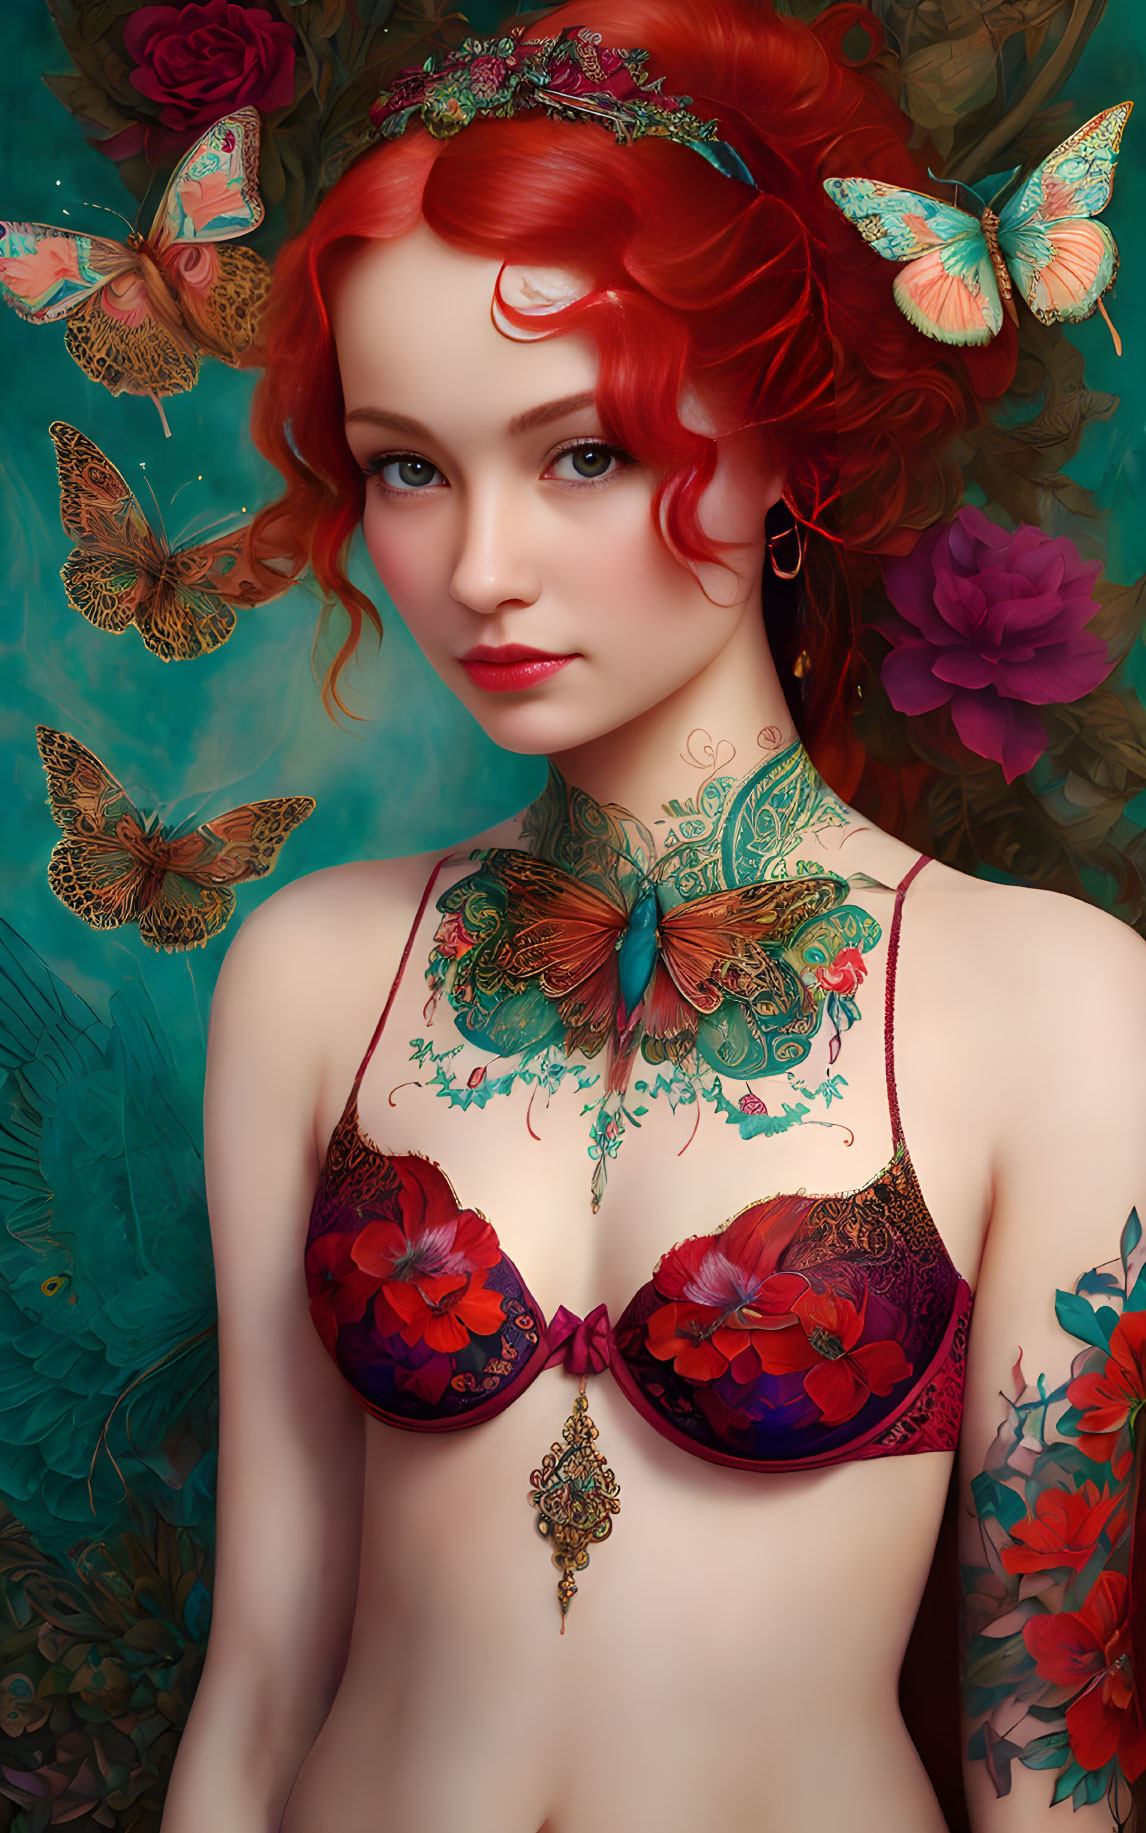 Red-haired woman with tattoos and butterflies on floral background.